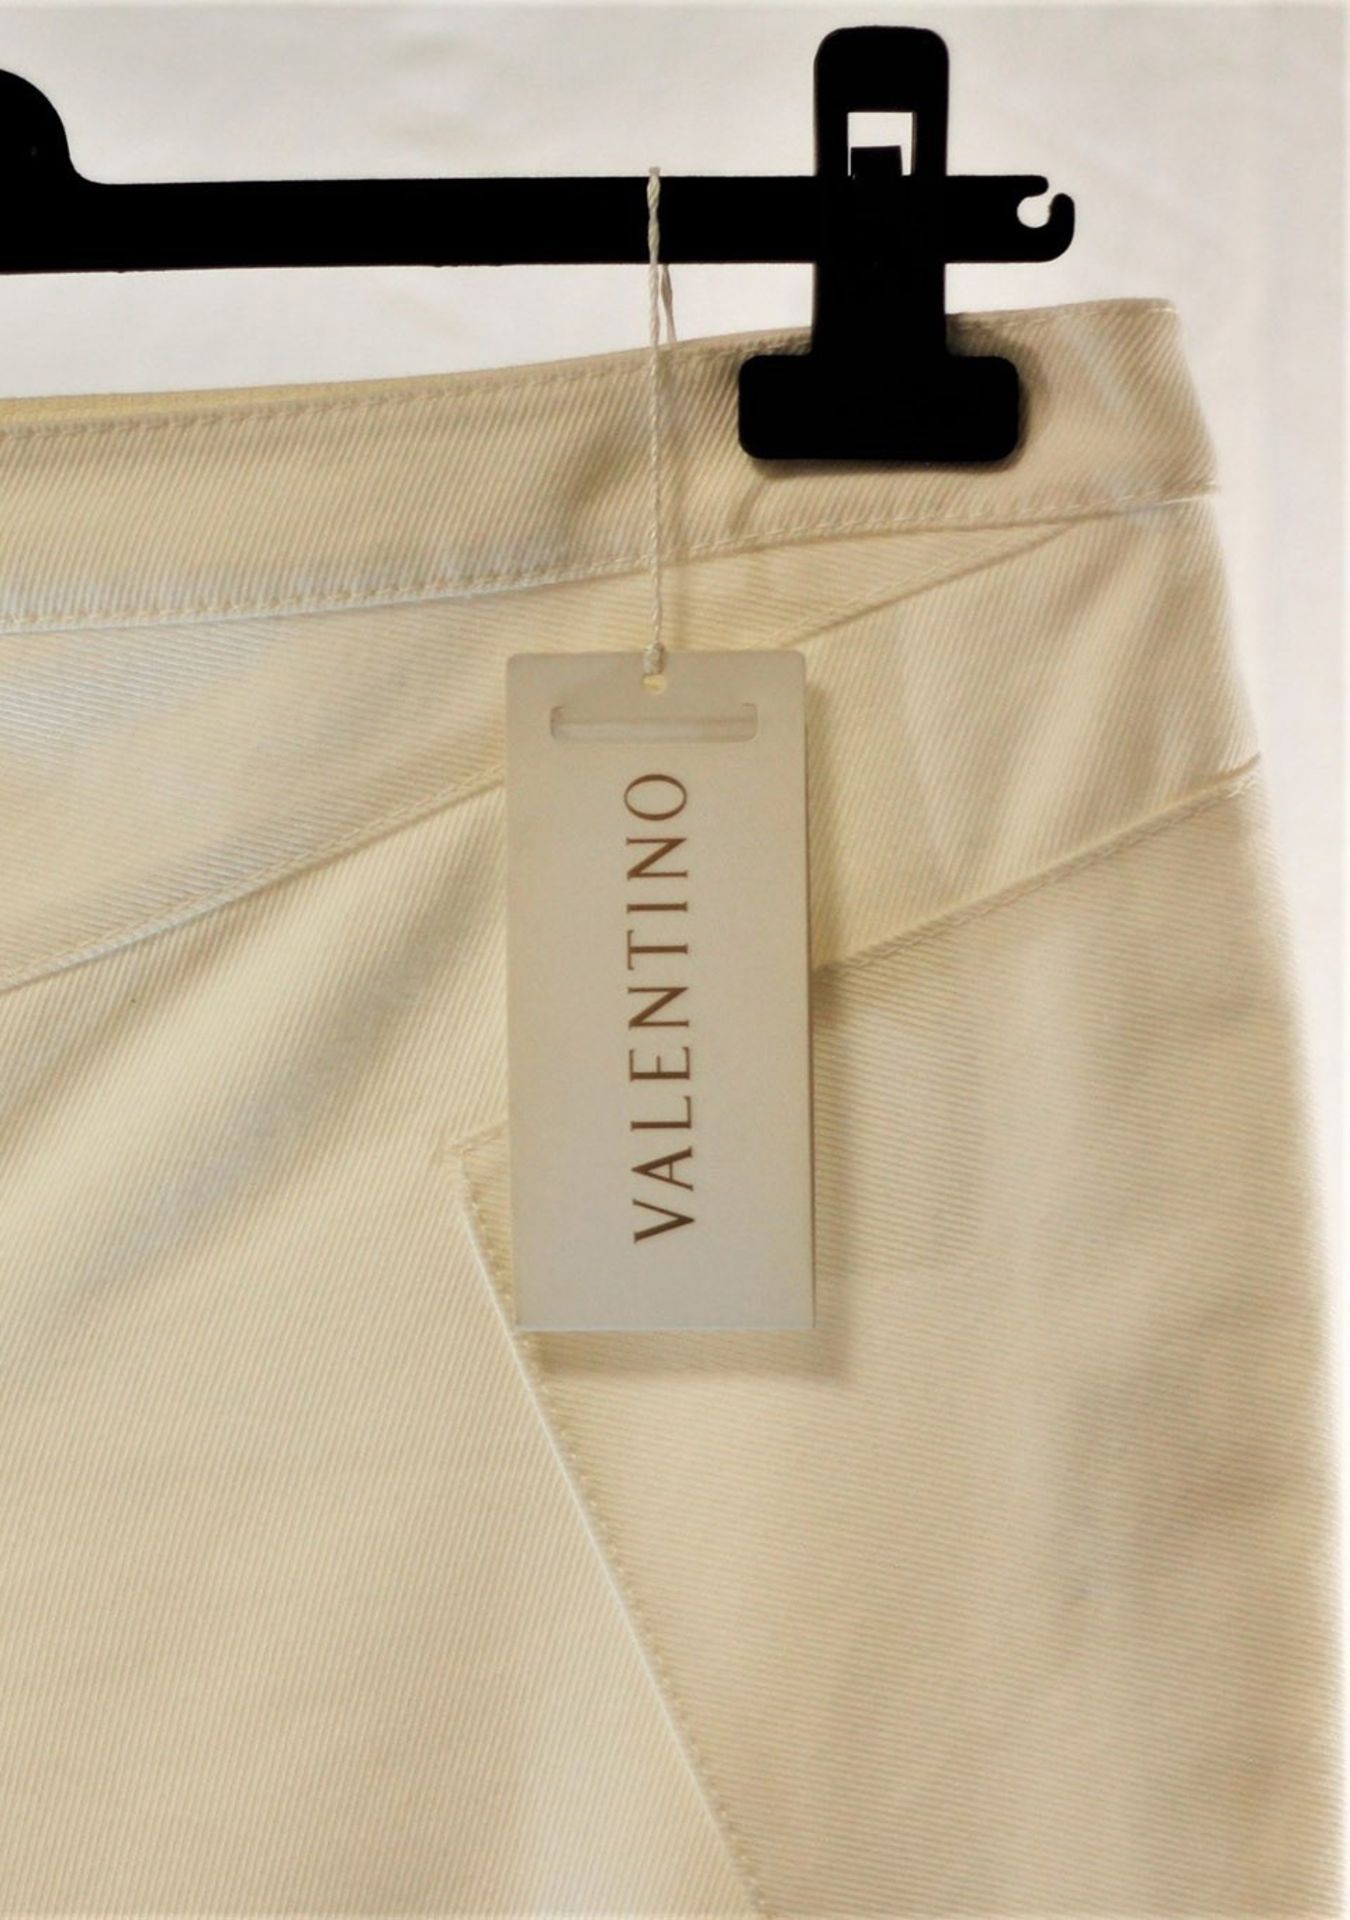 1 x Valentino Cream Trousers - Size: 10 - Material: 98% Cotton, 2% Elastane. Lining 100% Polyester - - Image 2 of 5